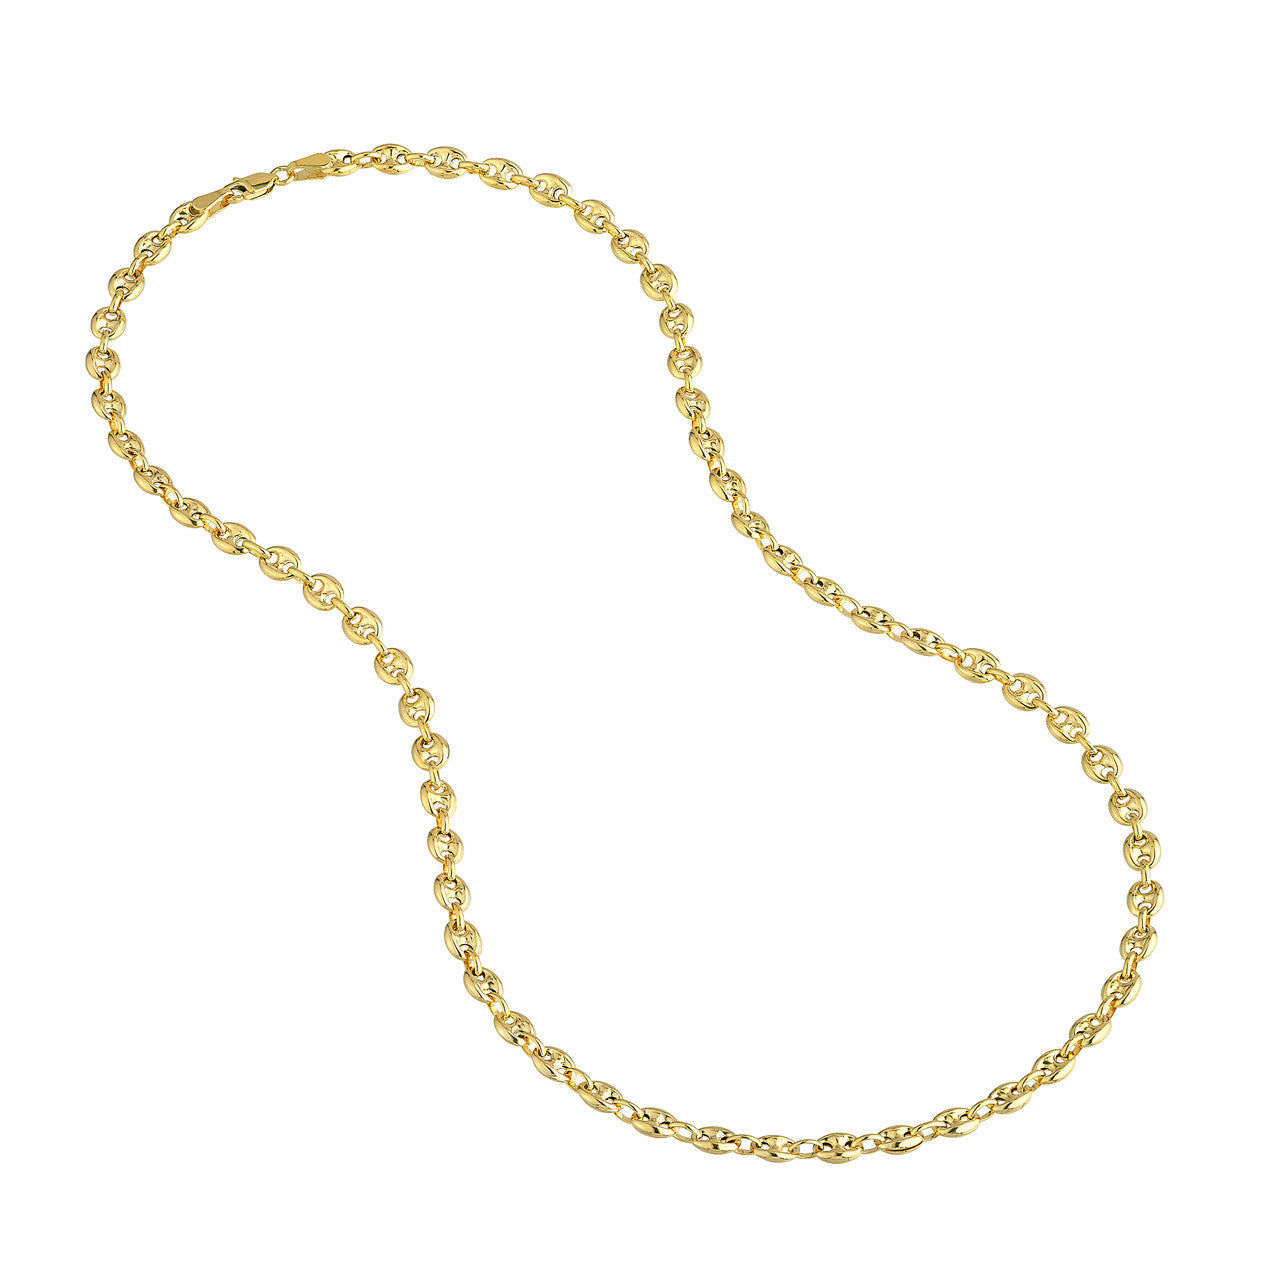 14k Yellow Gold Puff Carabiner Bracelet Anklet Choker Necklace Pendant Chain